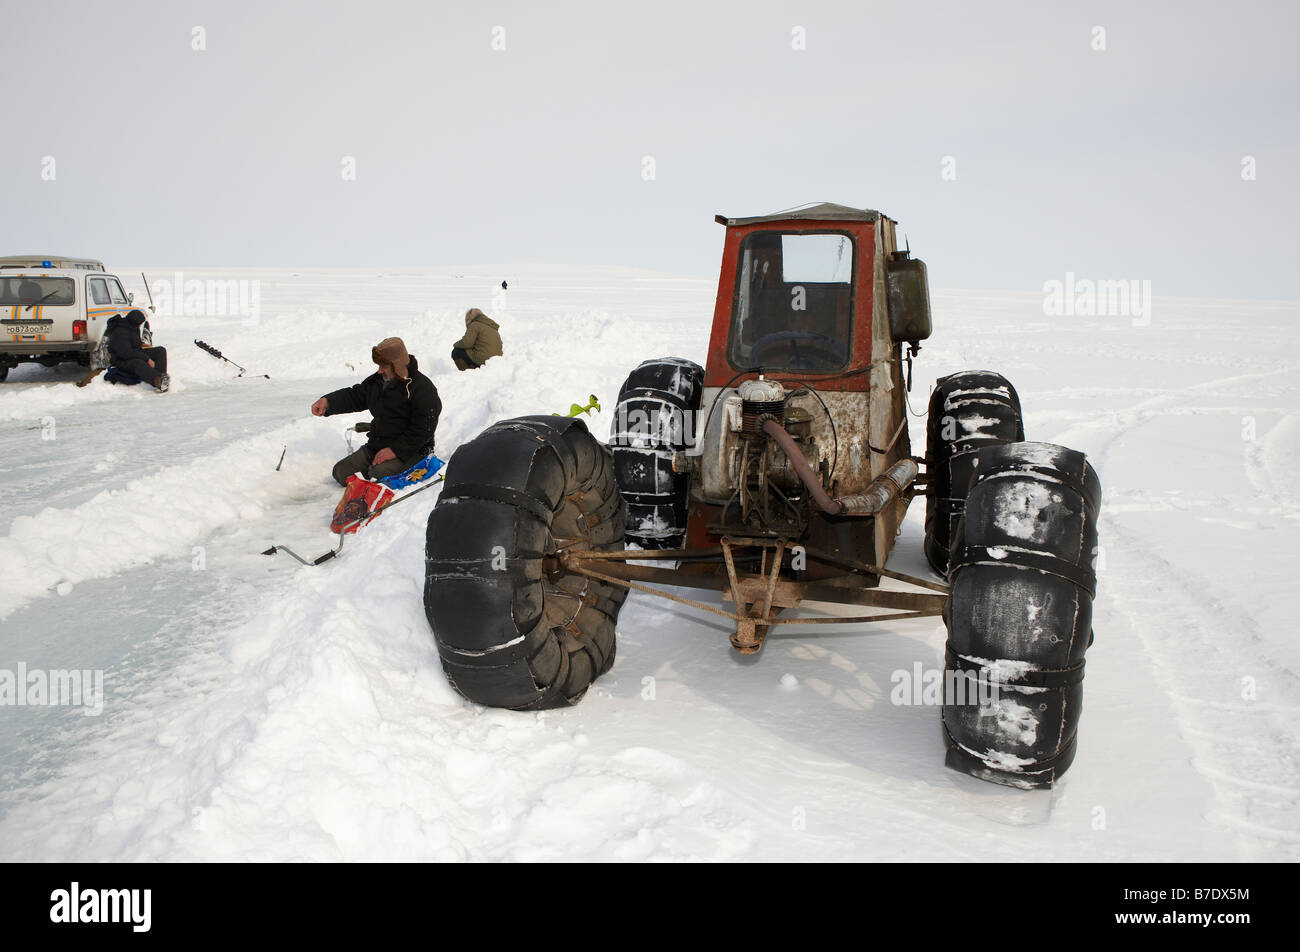 Ice fishing for smelts by homemade 4 wheeler vehicle,  Anadyr Chukotka, Siberia Russia Stock Photo